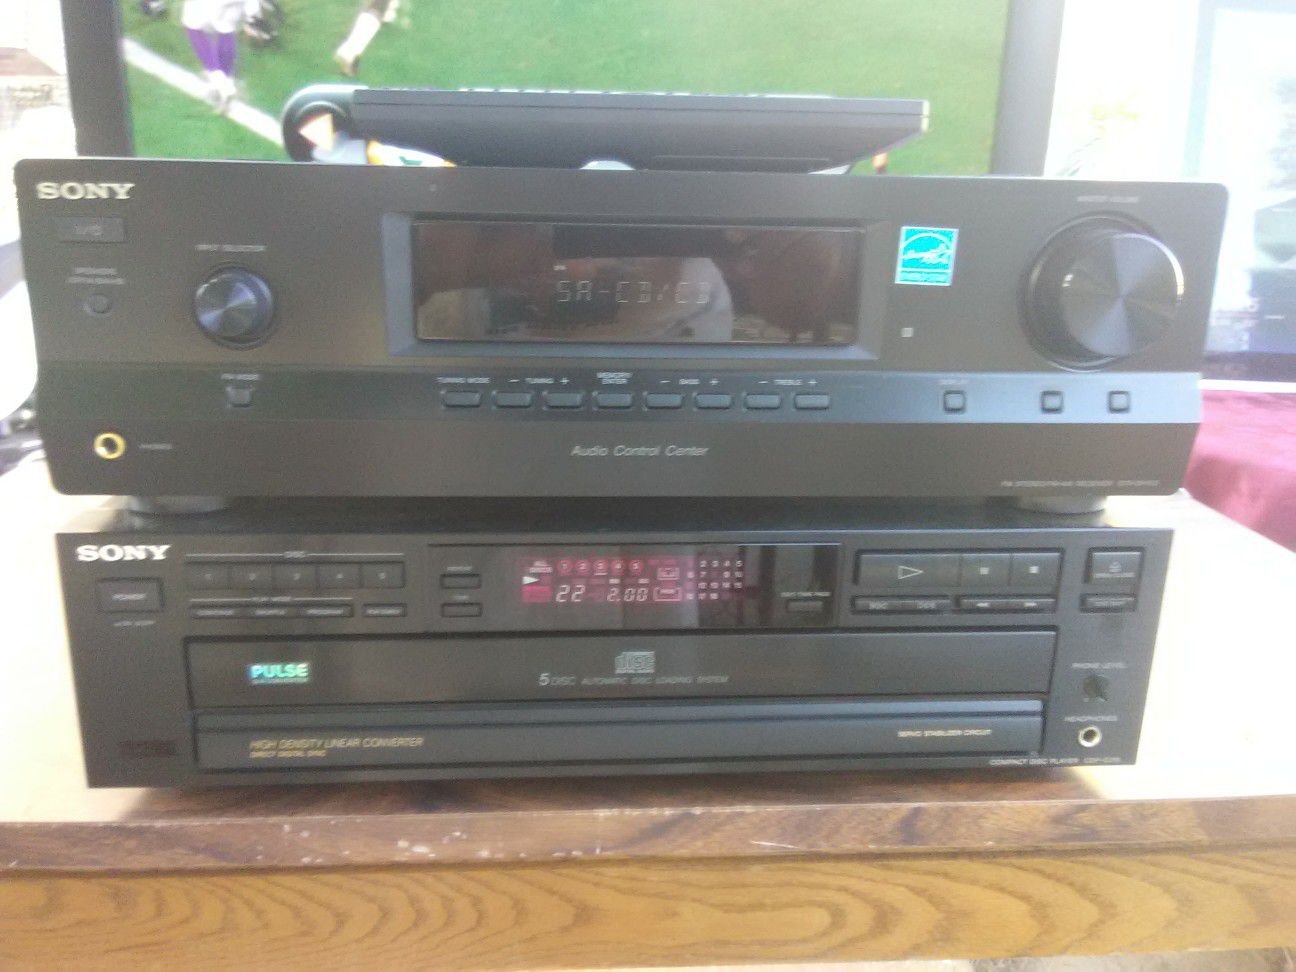 300 Watts Sony receiver with remote control and 5 discs CD player $150